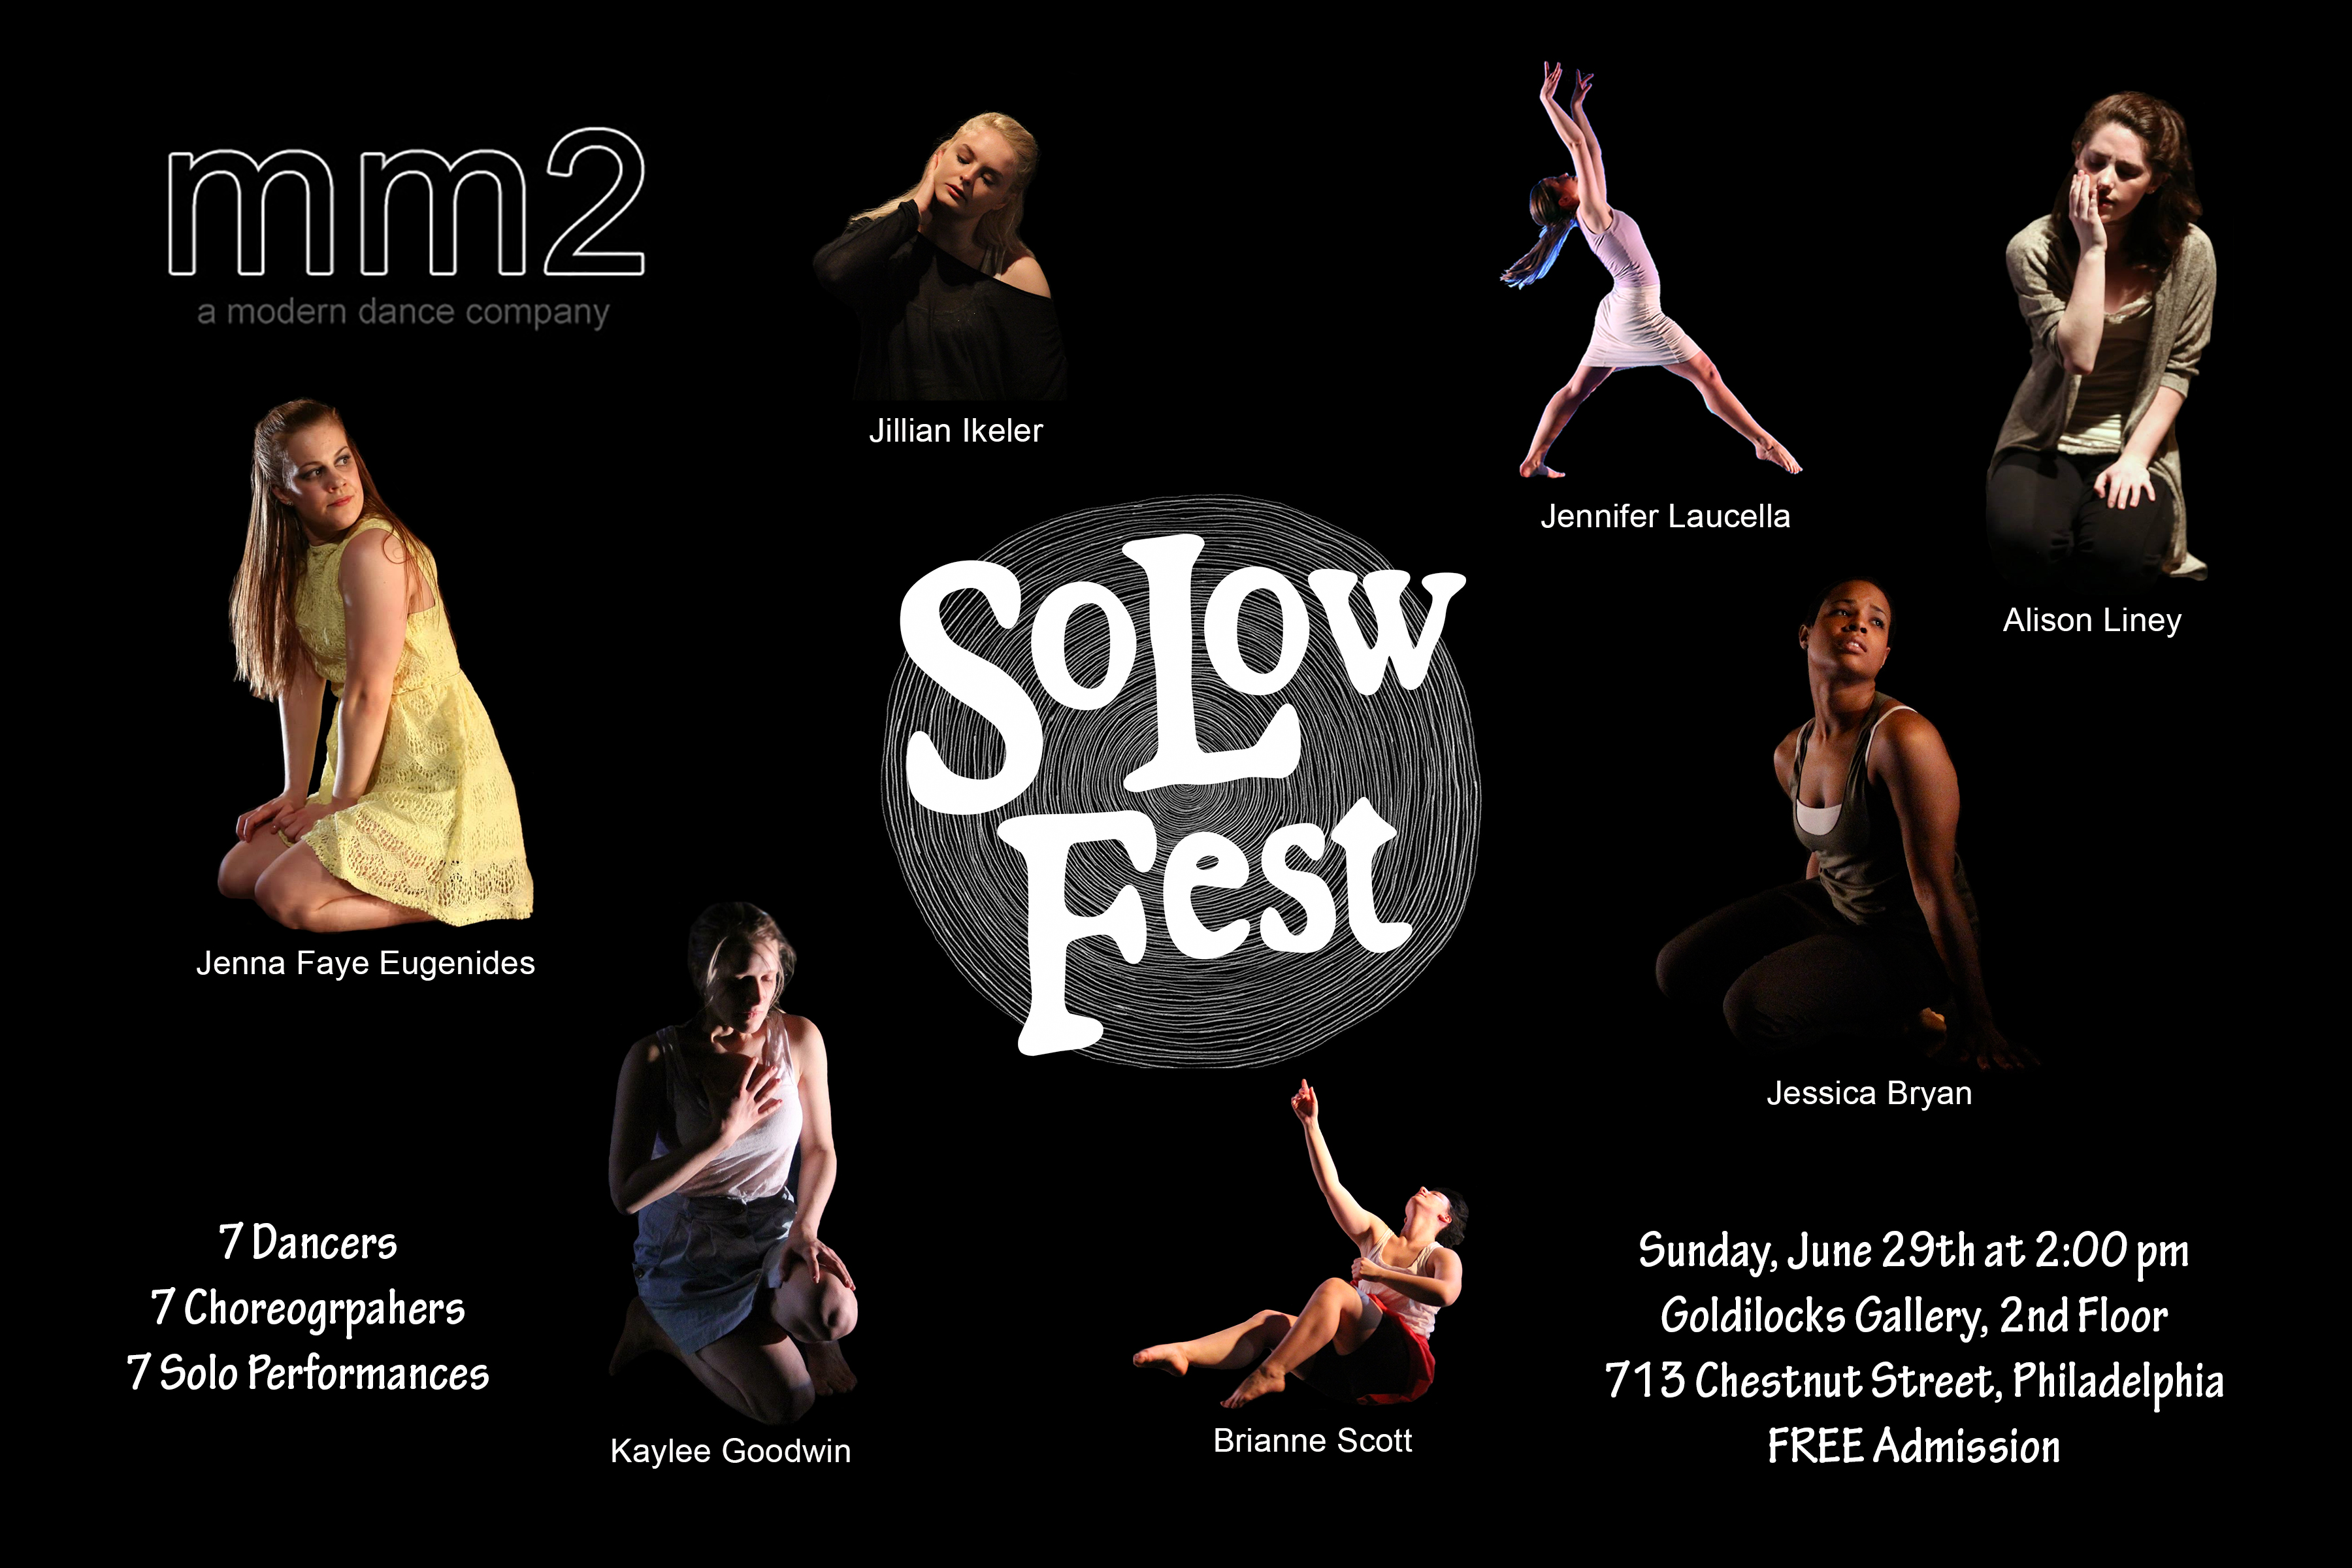 MM2 Modern Dance presents Circle of Seven at Solow Fest